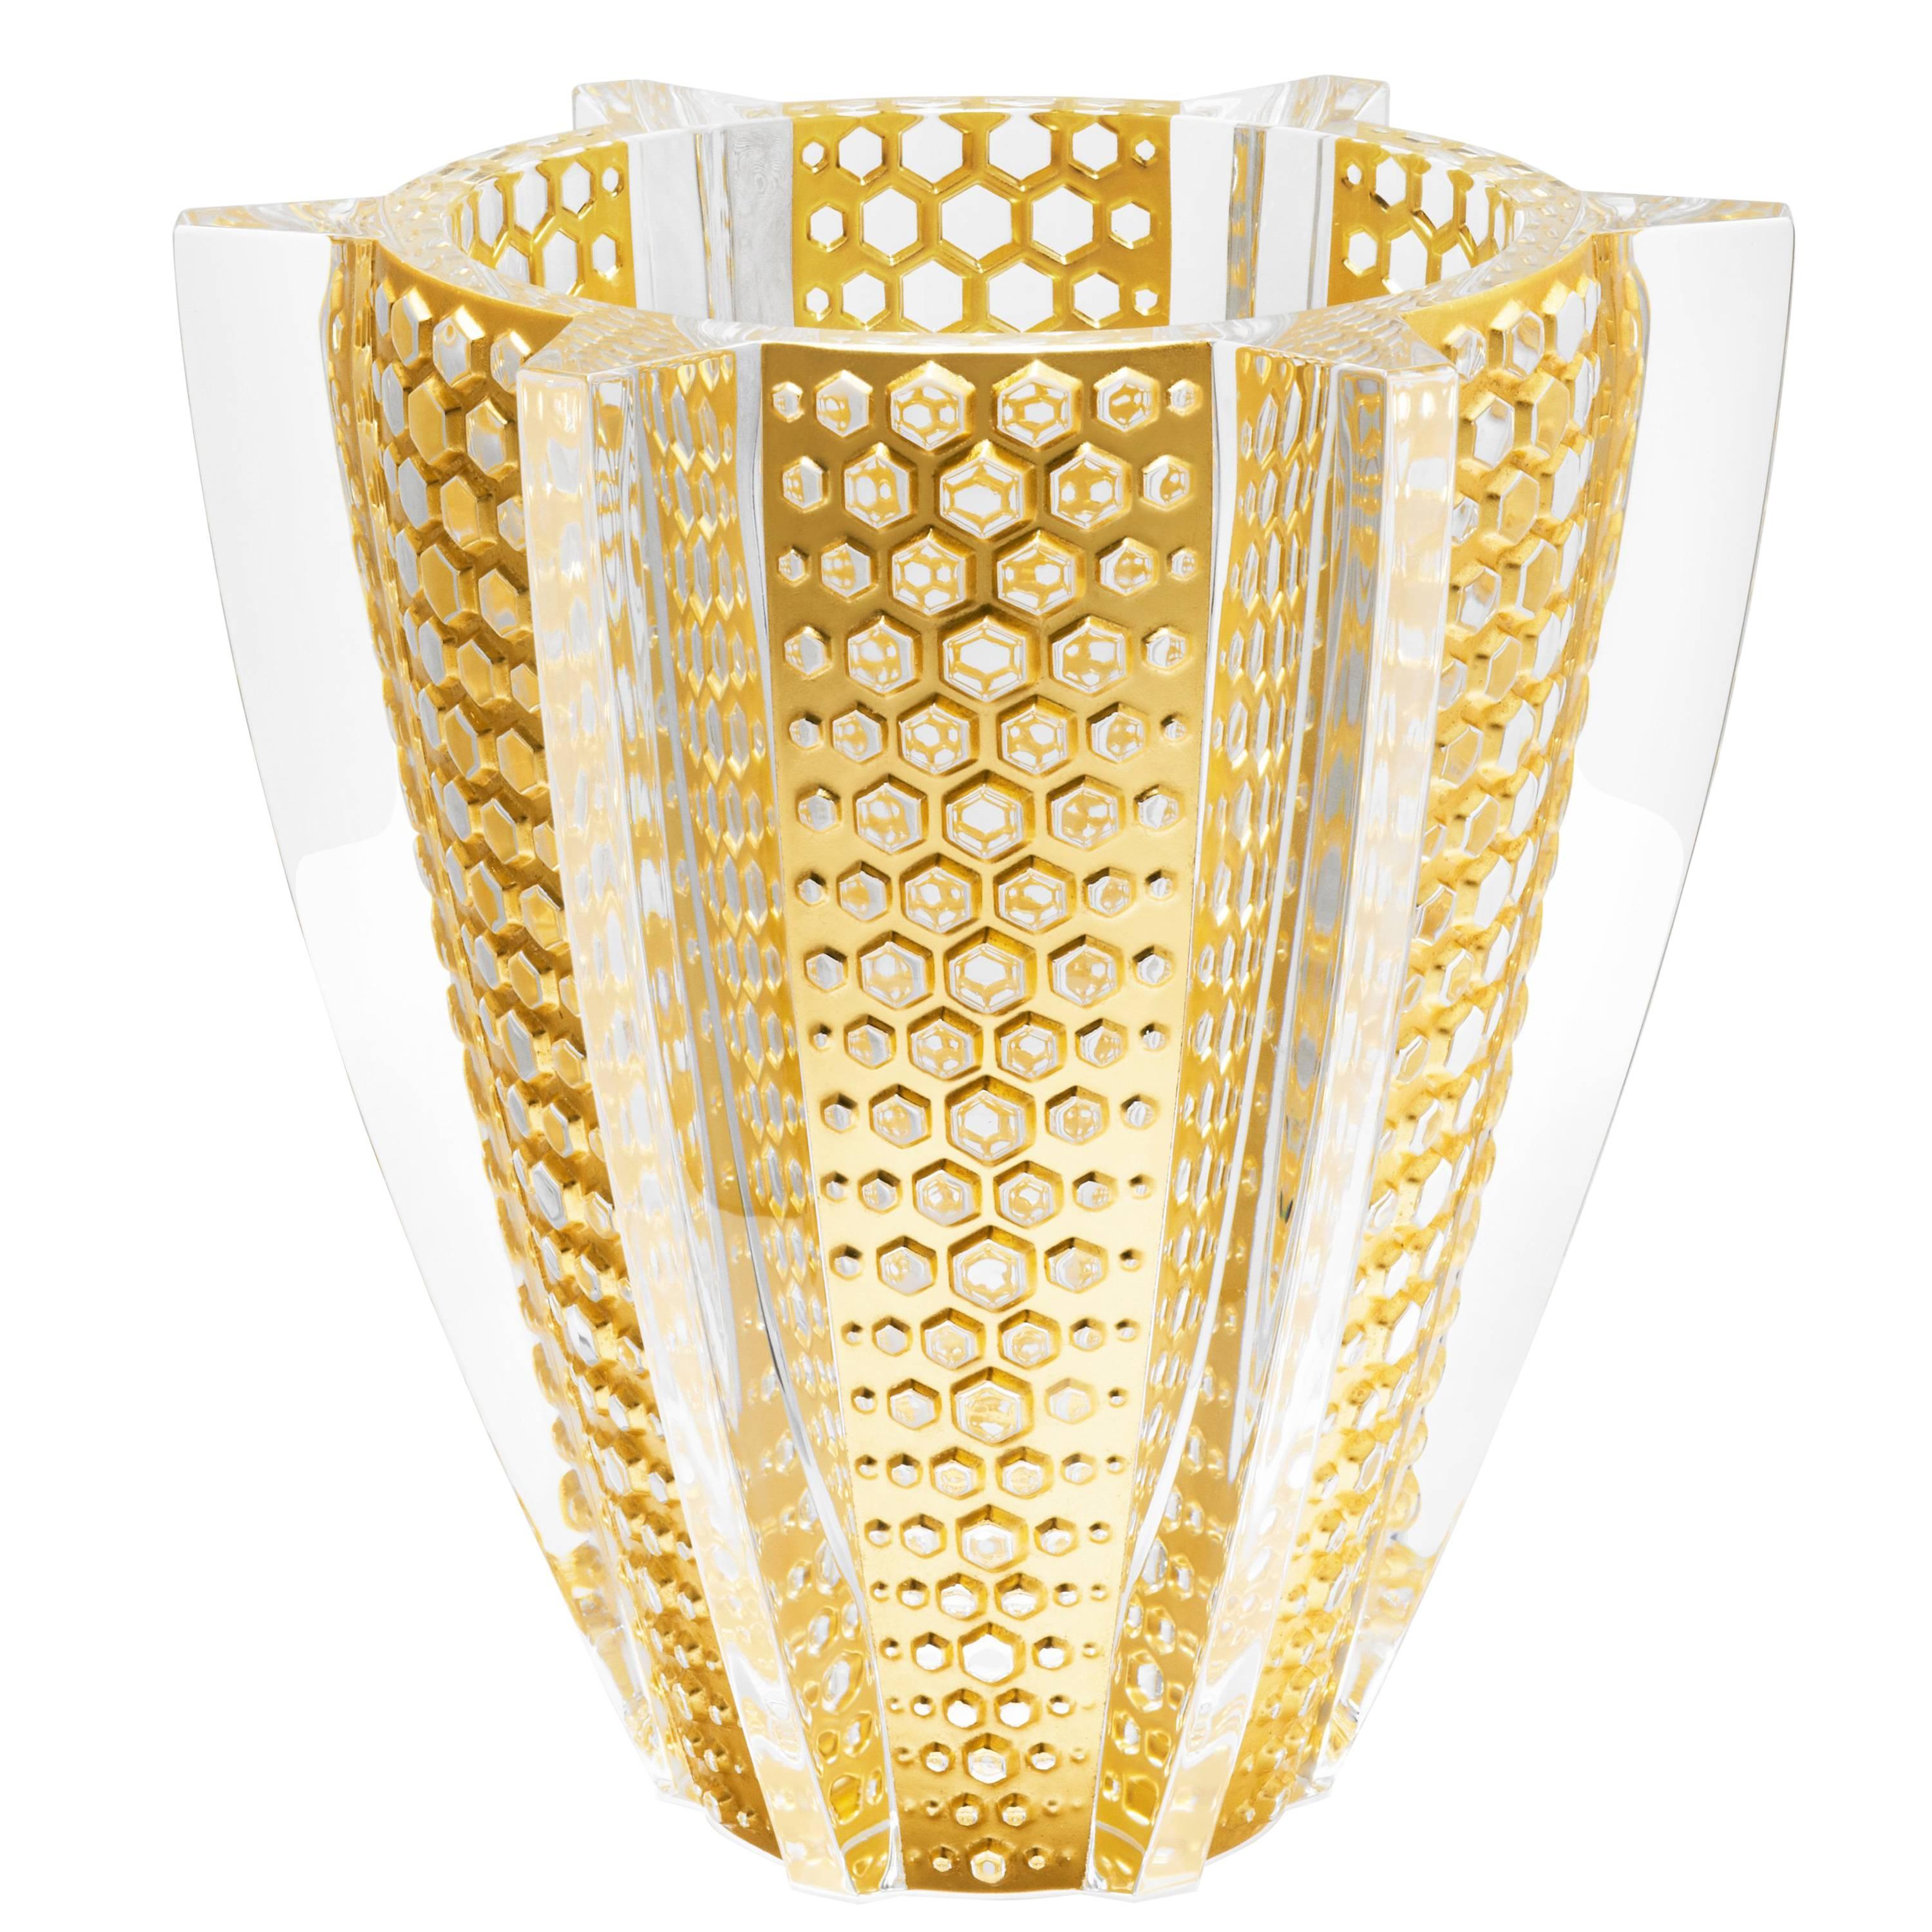 LALIQUE Rayons Vase Limited Edition 88 ex  For Sale